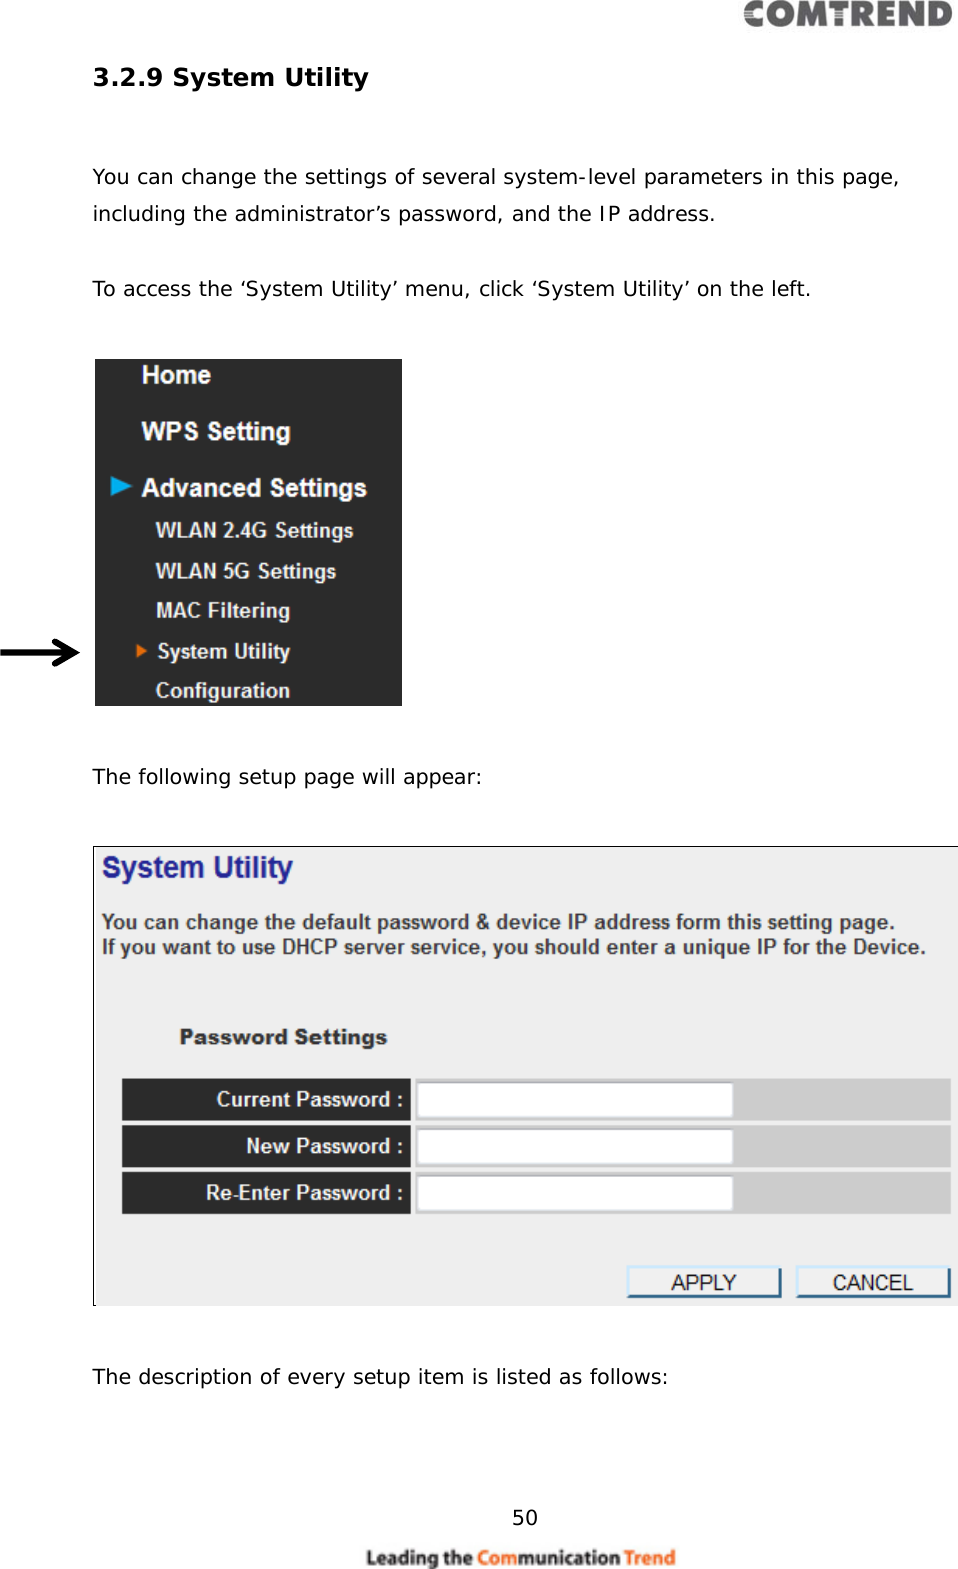     50  3.2.9 System Utility  You can change the settings of several system-level parameters in this page, including the administrator’s password, and the IP address.  To access the ‘System Utility’ menu, click ‘System Utility’ on the left.    The following setup page will appear:    The description of every setup item is listed as follows:    